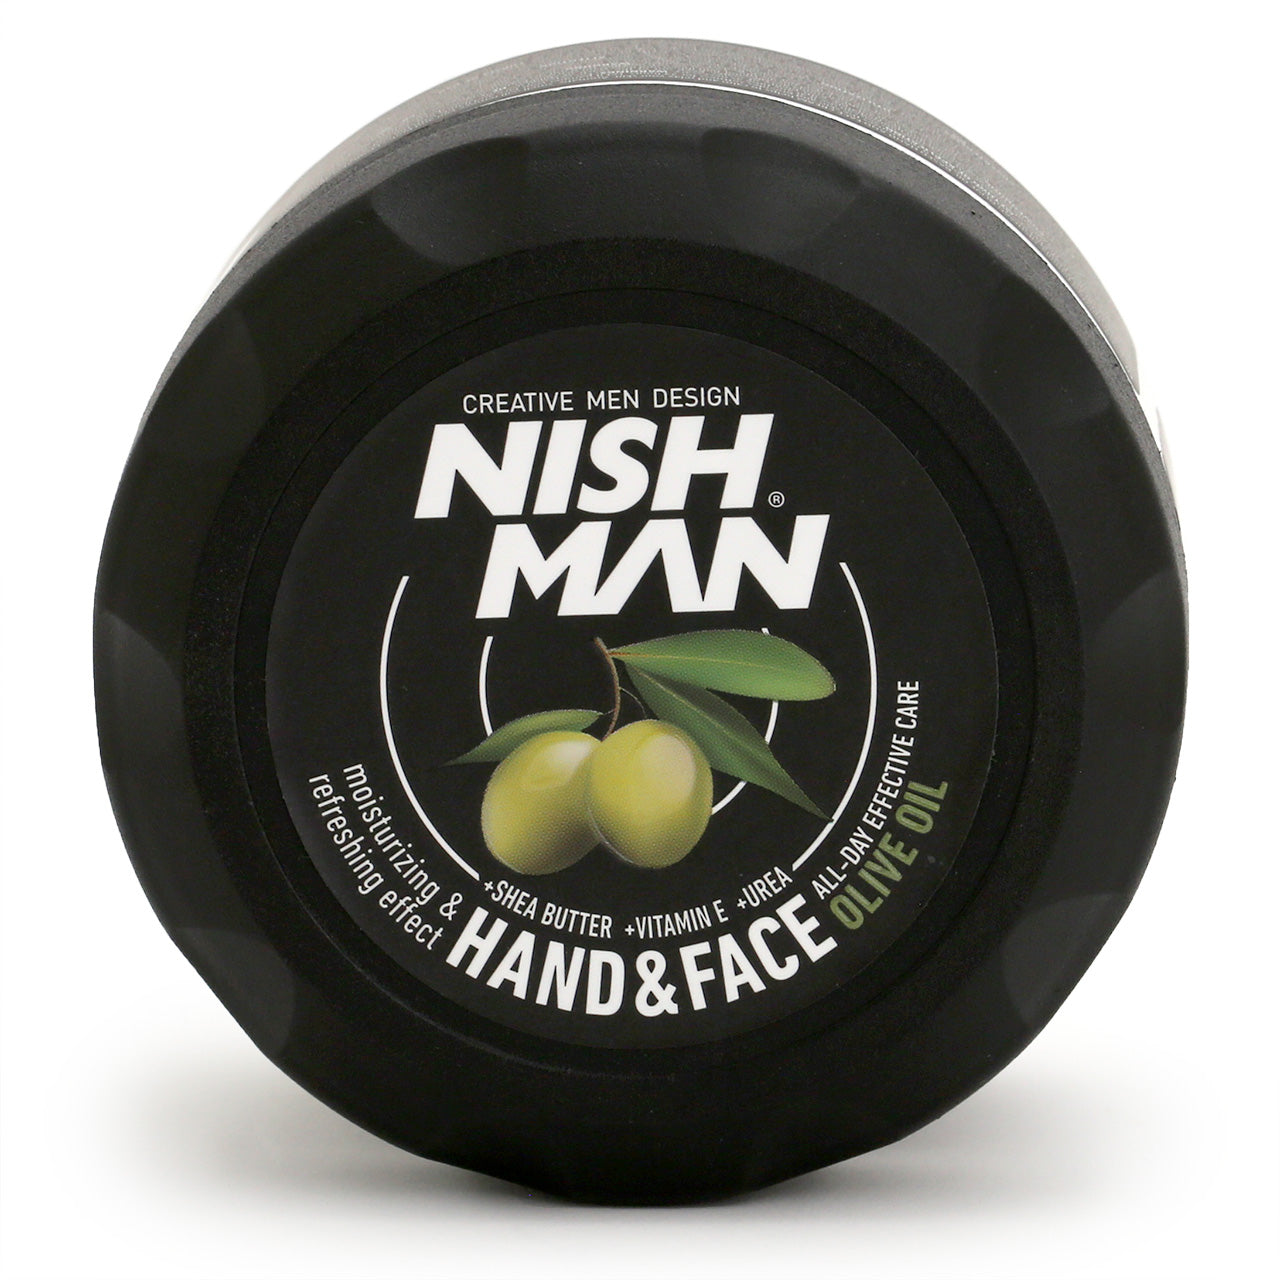 Nishman Hand and Face Cream in sturdy black and white tub. top view